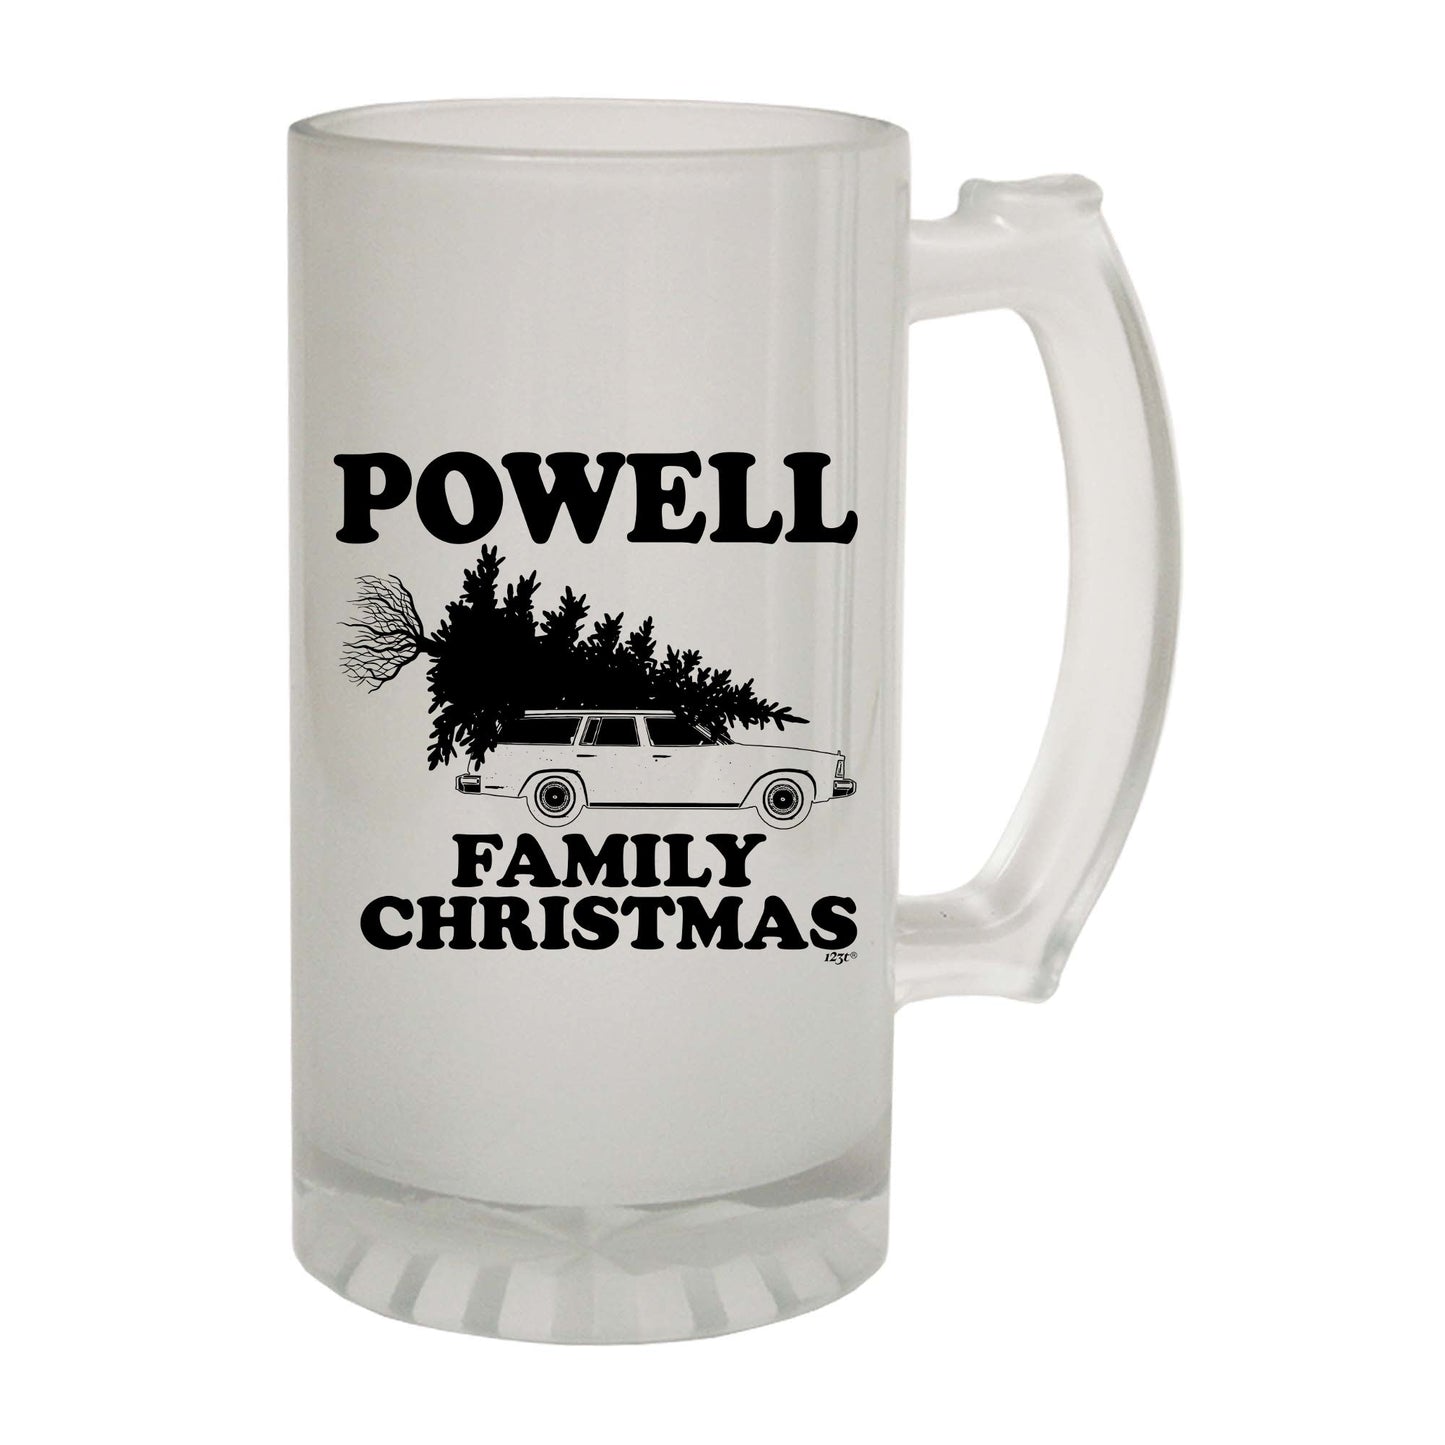 Family Christmas Powell - Funny Beer Stein